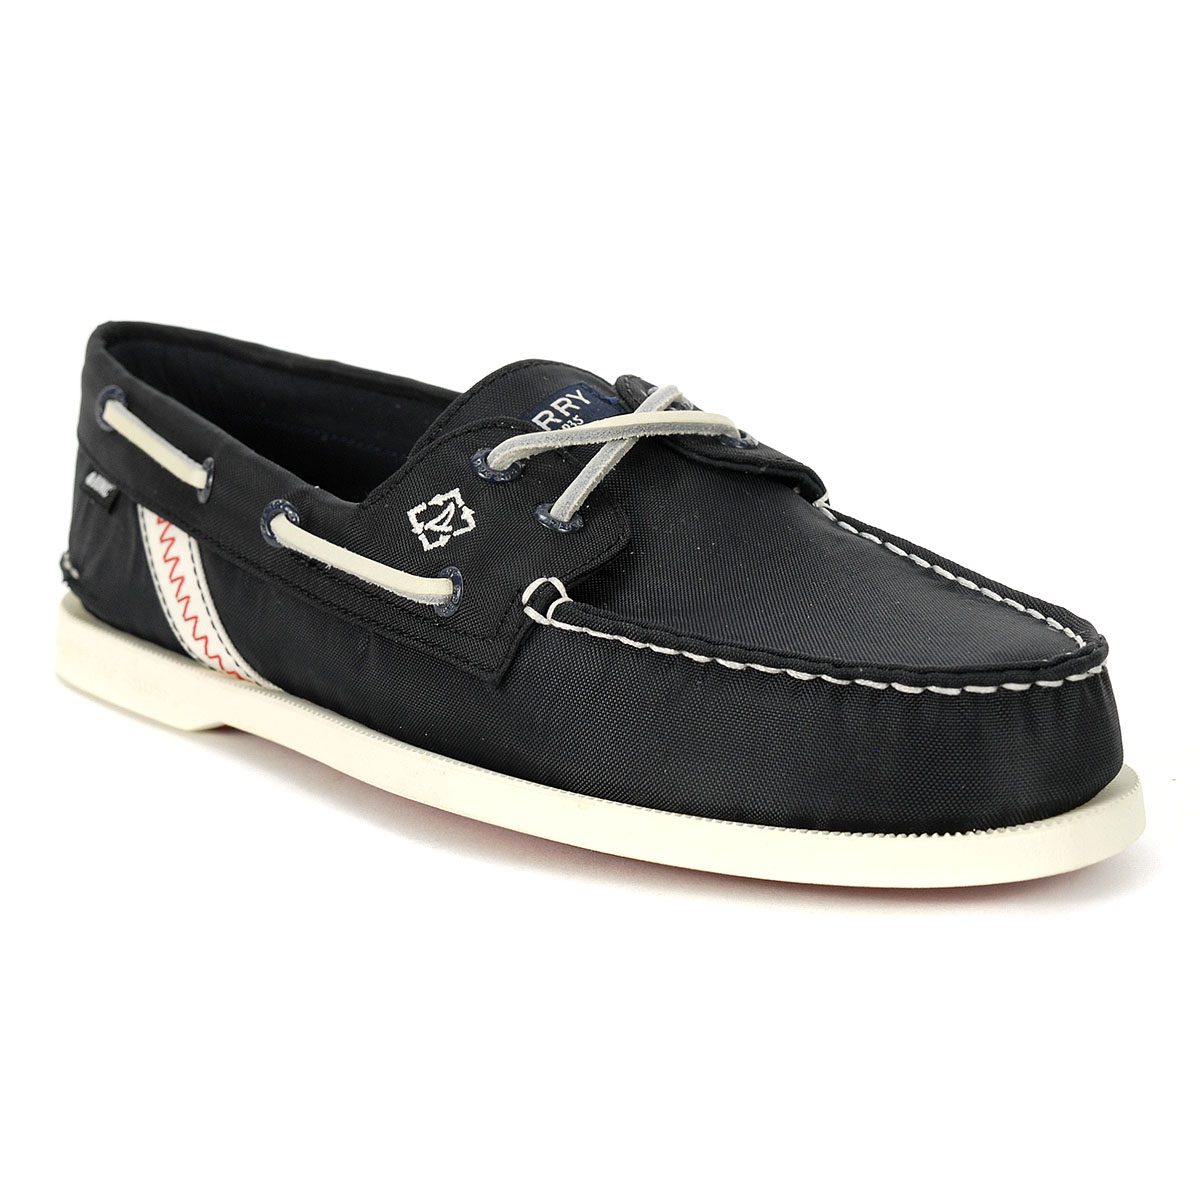 Sperry Top-Sider Men's Original Bionic Navy Boat Shoes STS21582 - WOOKI.COM